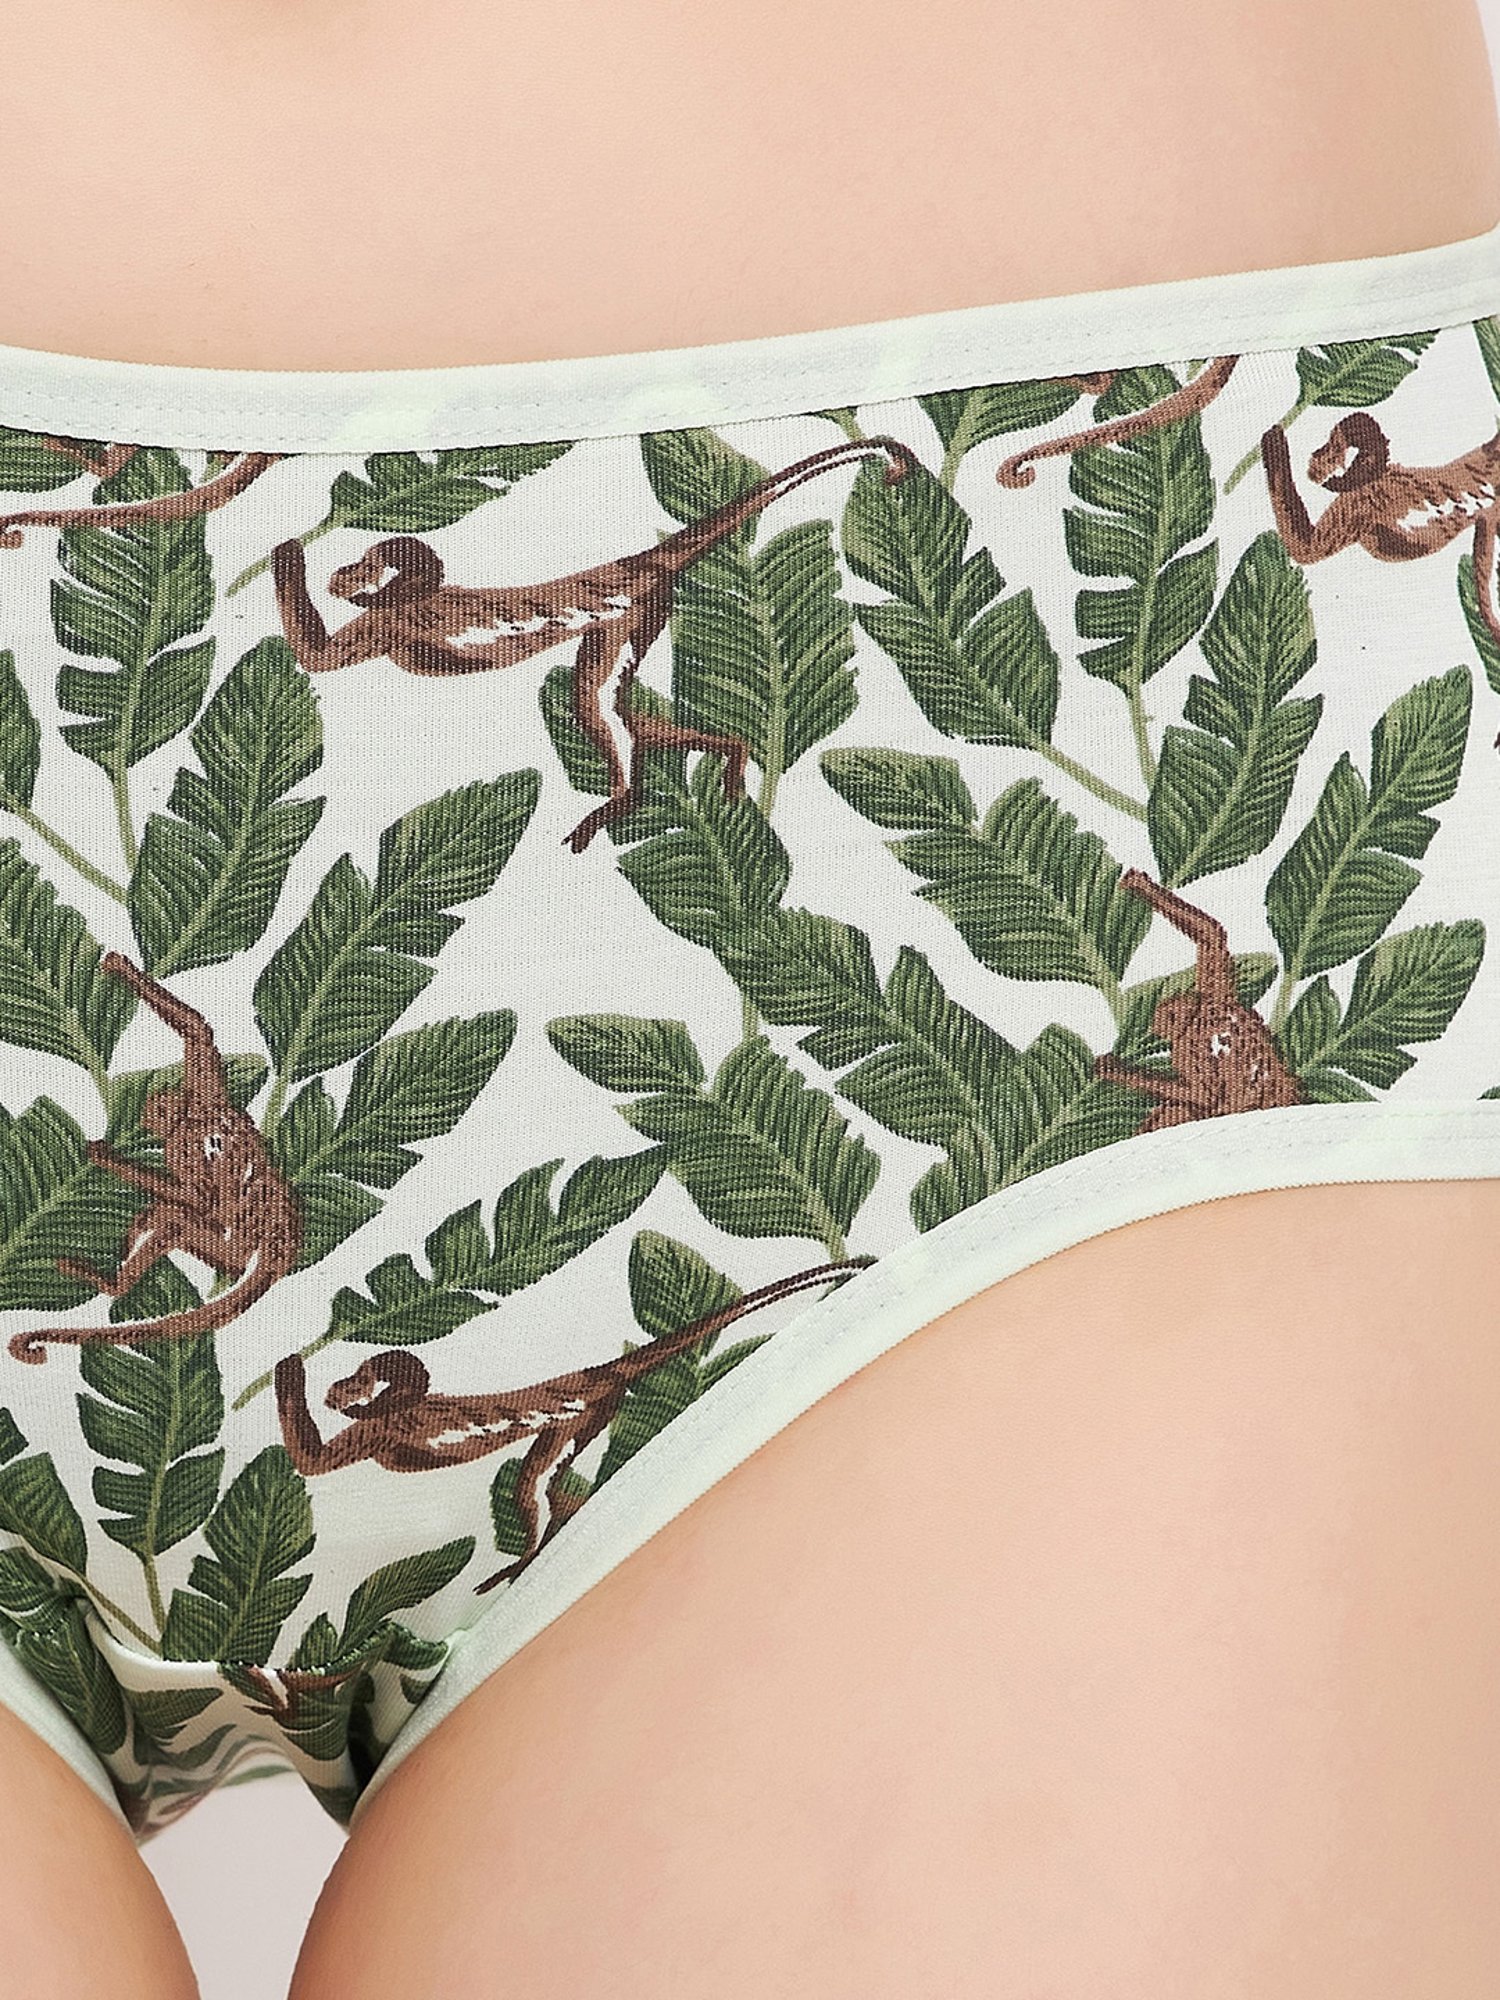 Buy Clovia Green Cotton Printed Hipster Panty for Women's Online